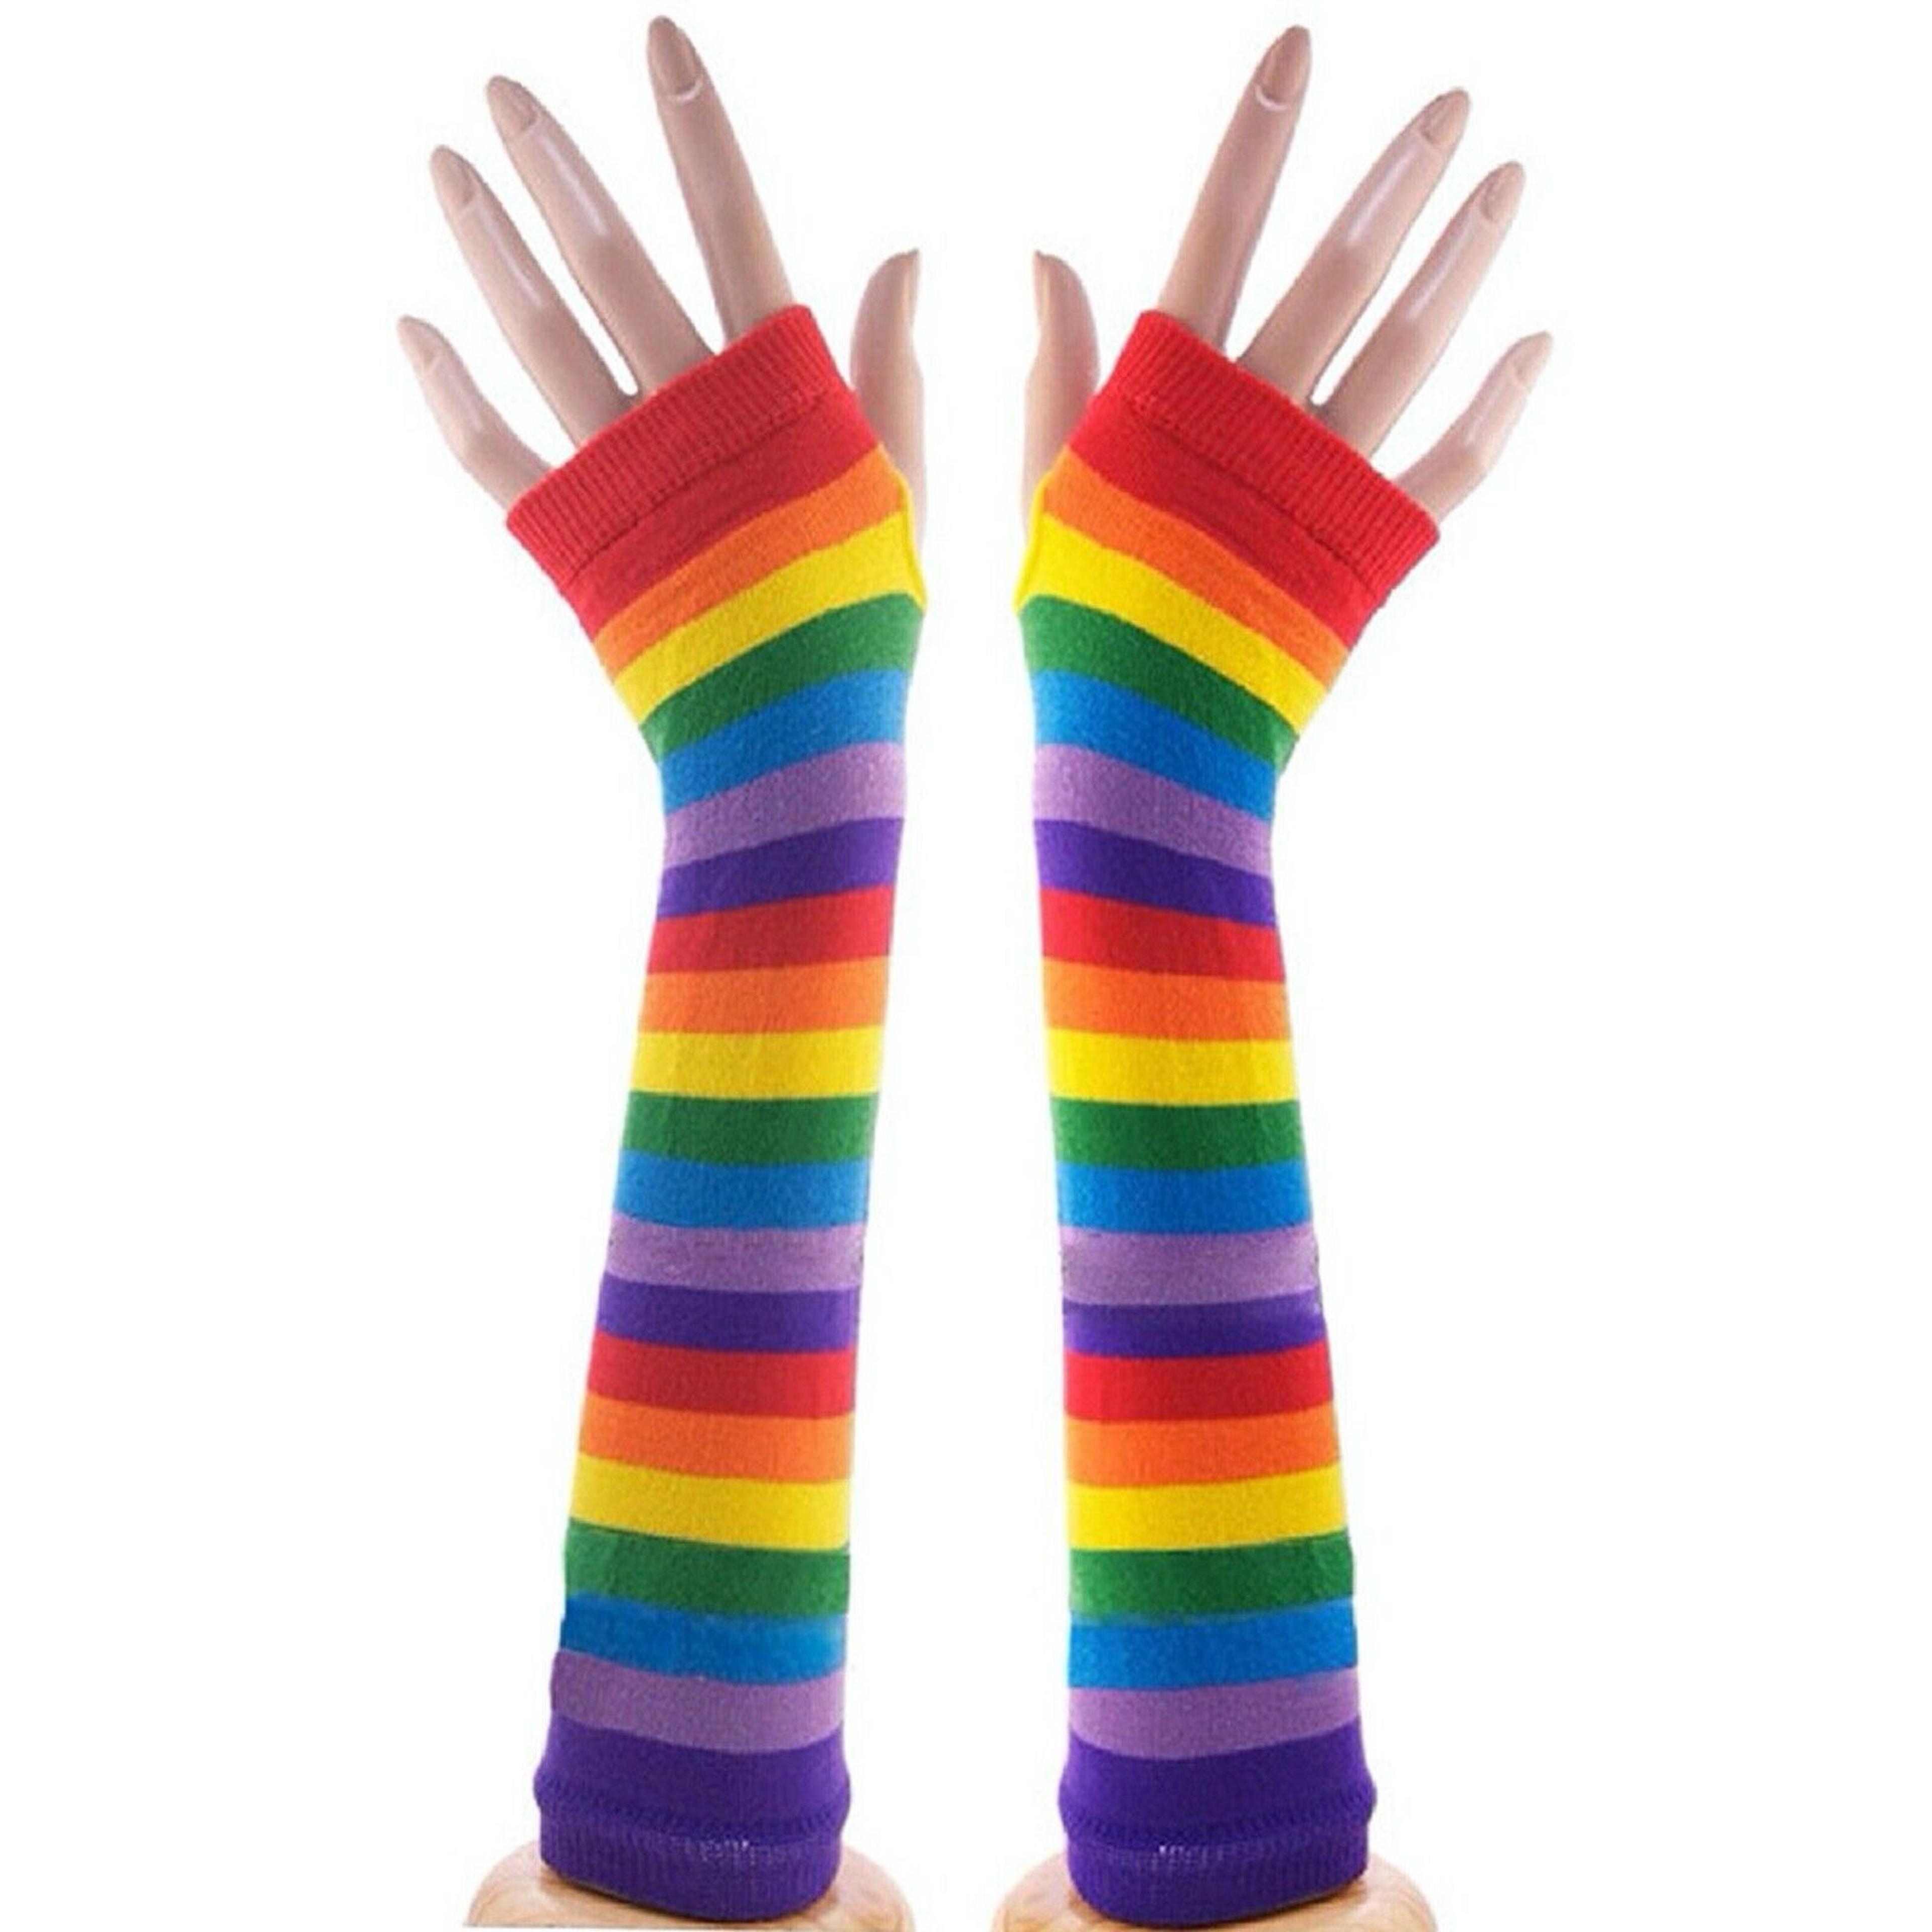 Rainbow Fingerless Knit Arm Warmers Gloves For Texting Warm Unisex